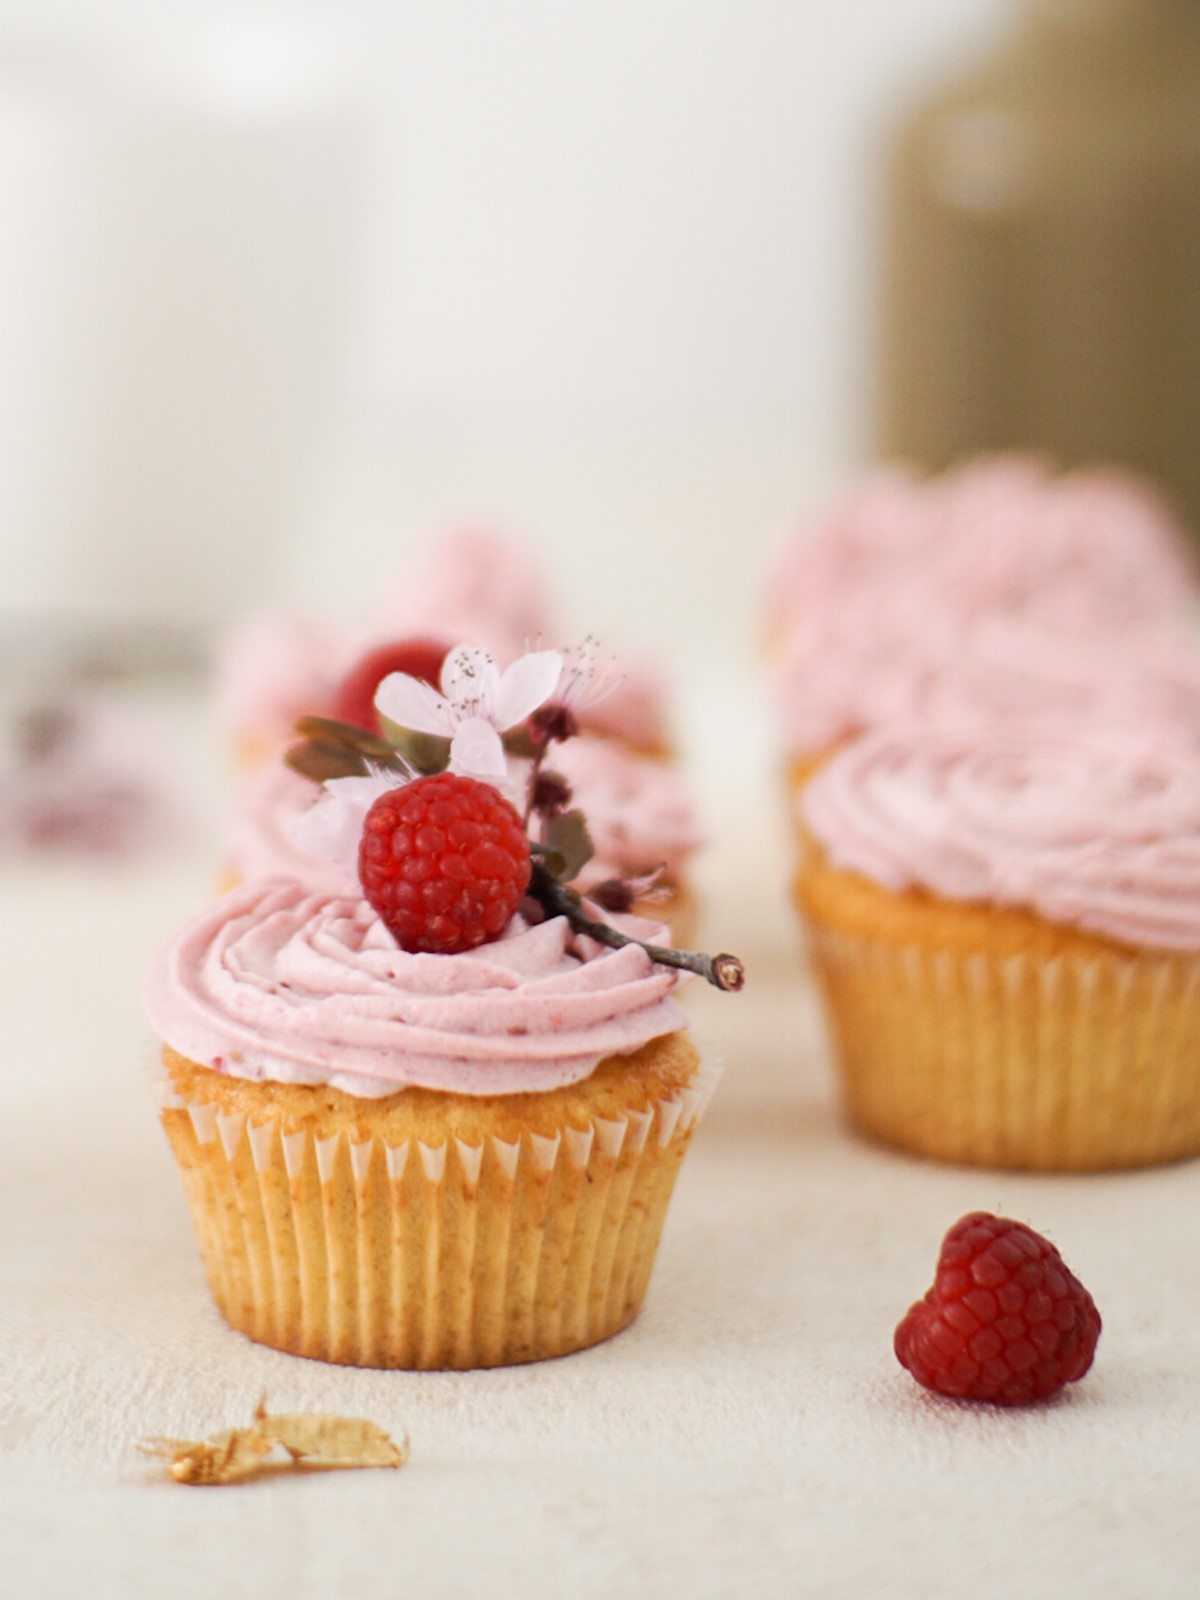 Leckere Himbeer-Cupcakes - Title of the Recipe